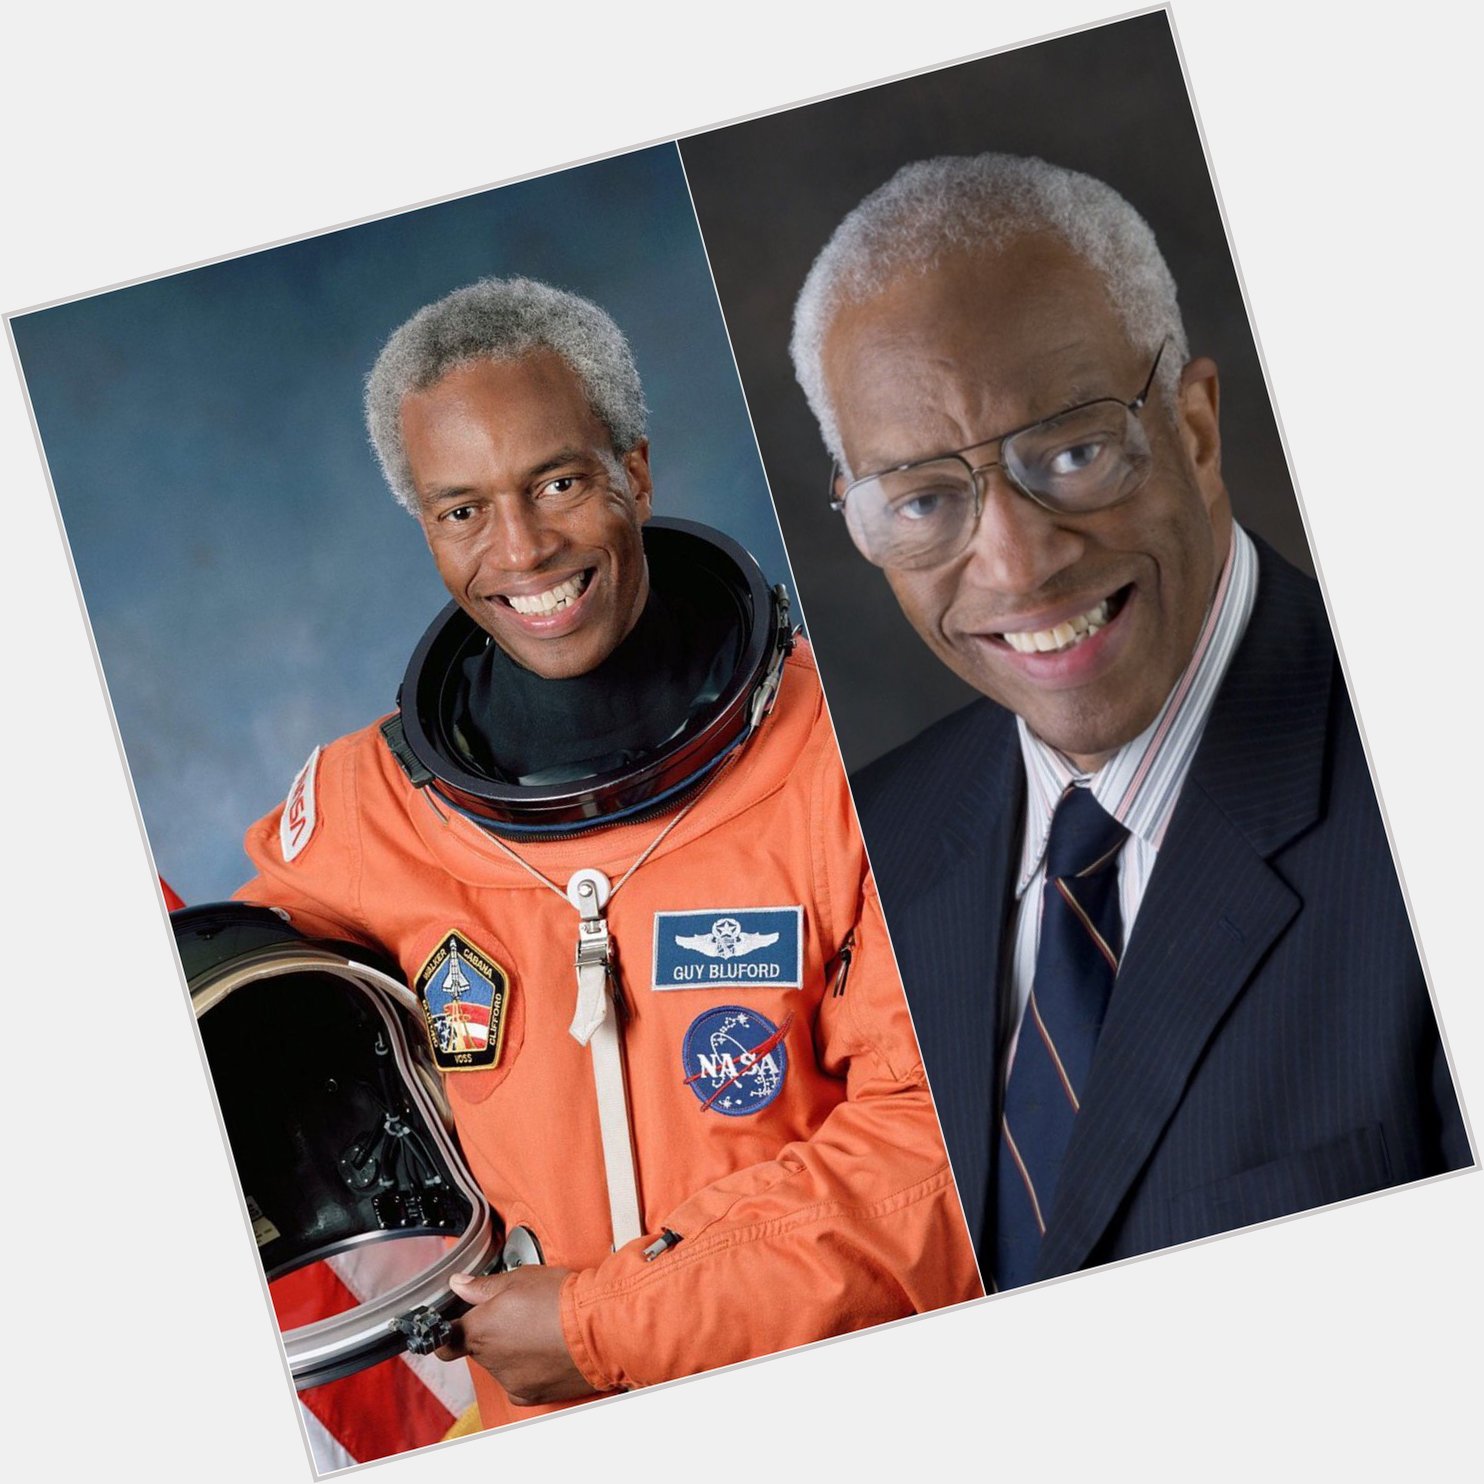 Happy 75th birthday to the first African American to travel into space, Guion Bluford! 